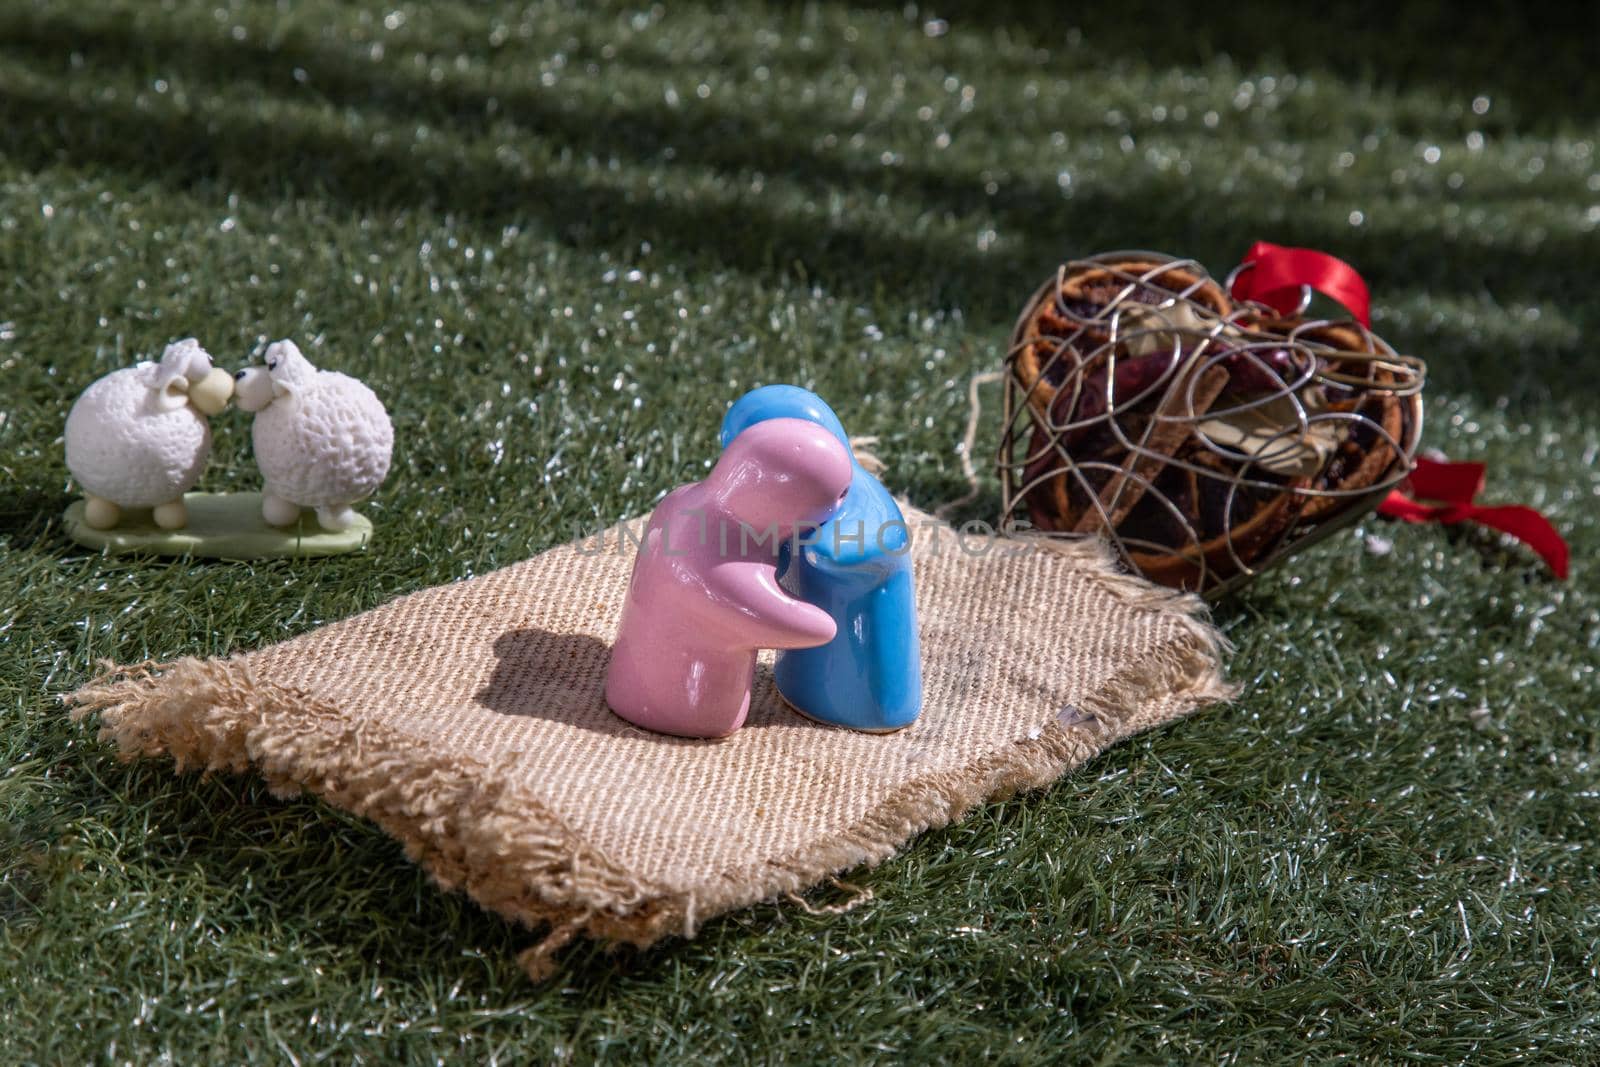 Sheep ceramic couple dolls Kissing and ceramic couple dolls hug on lawn. Love concept. by tosirikul